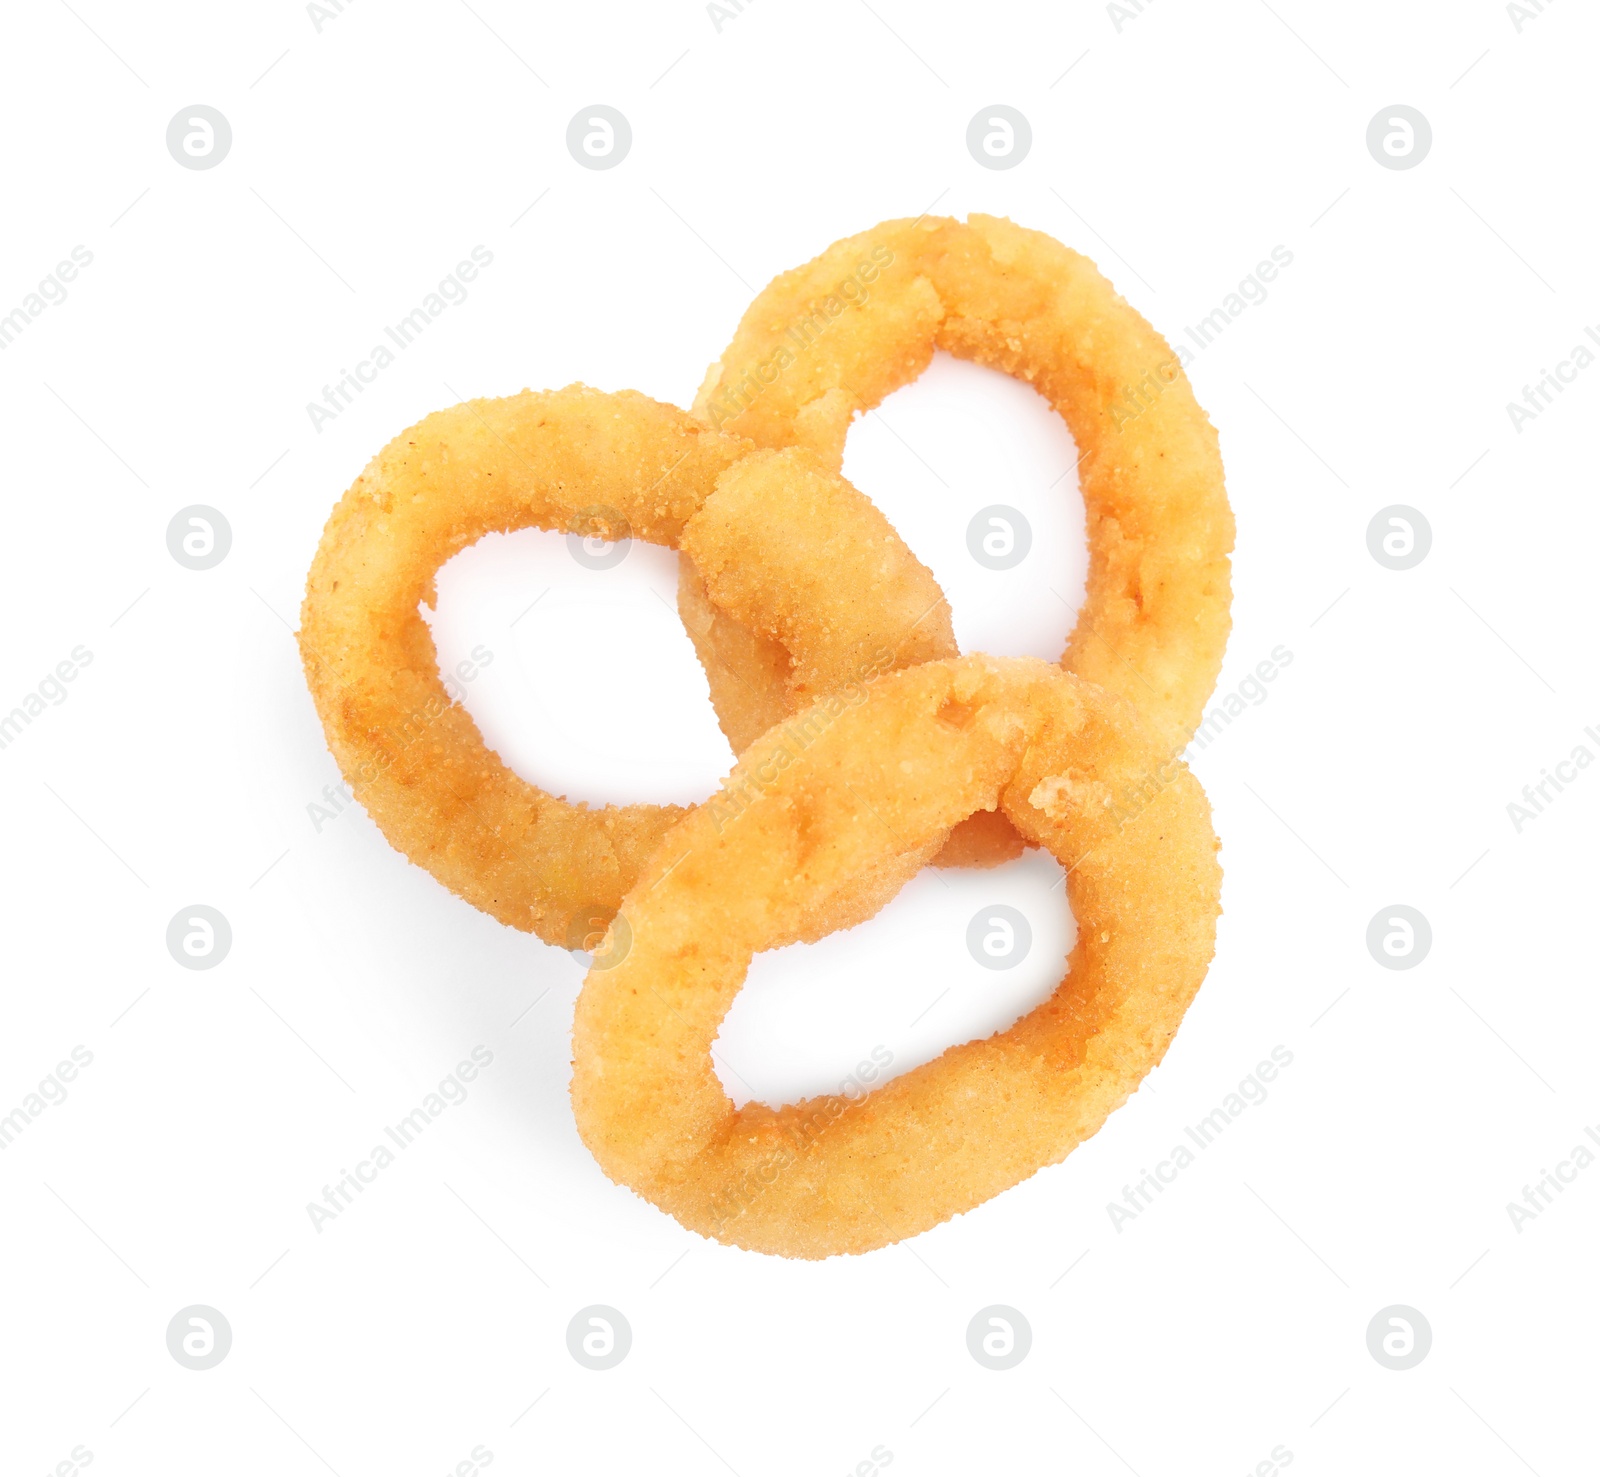 Photo of Delicious golden onion rings isolated on white